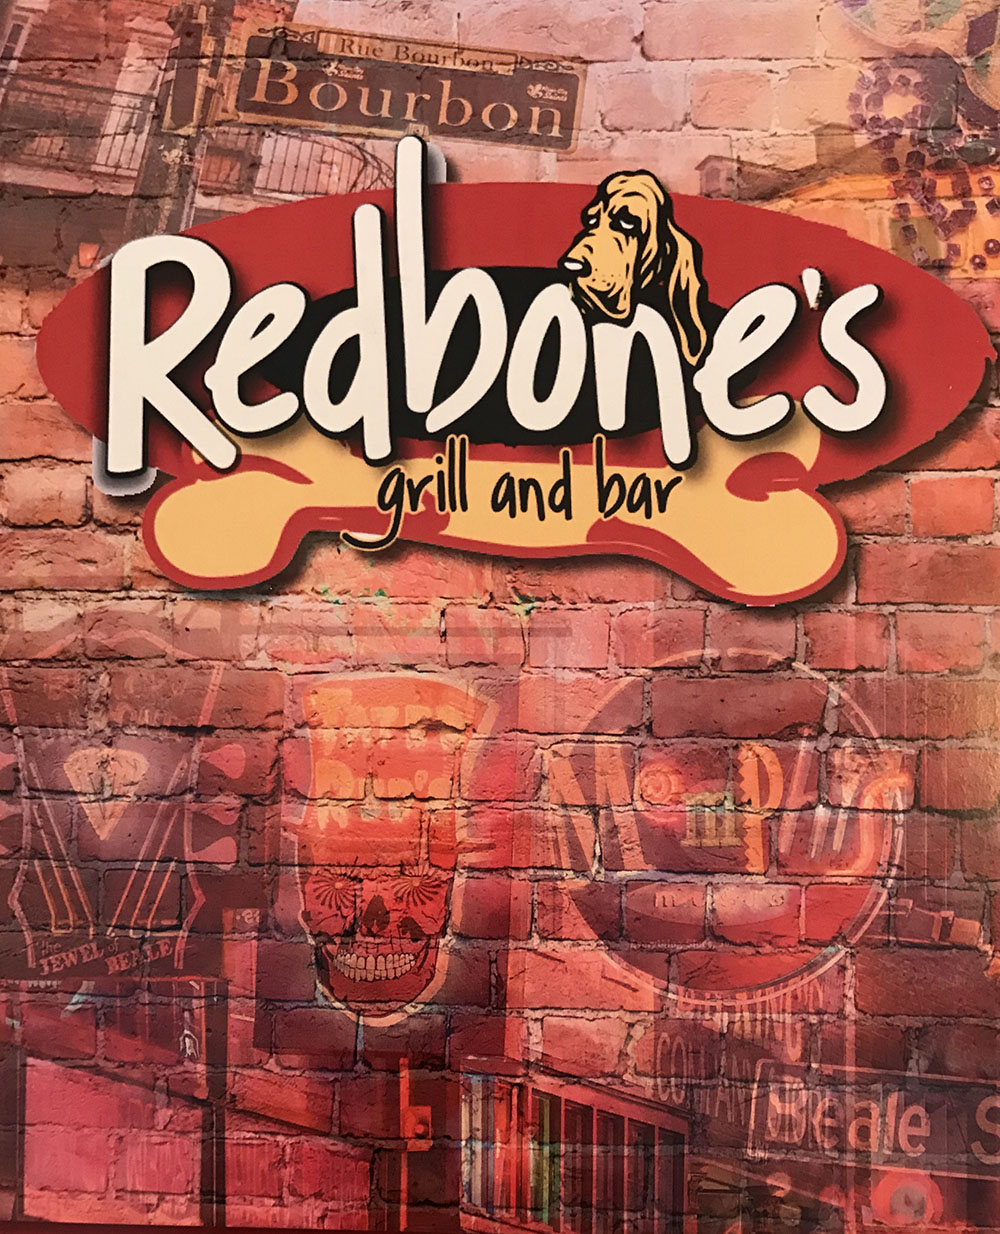 Come on to Redbone's!